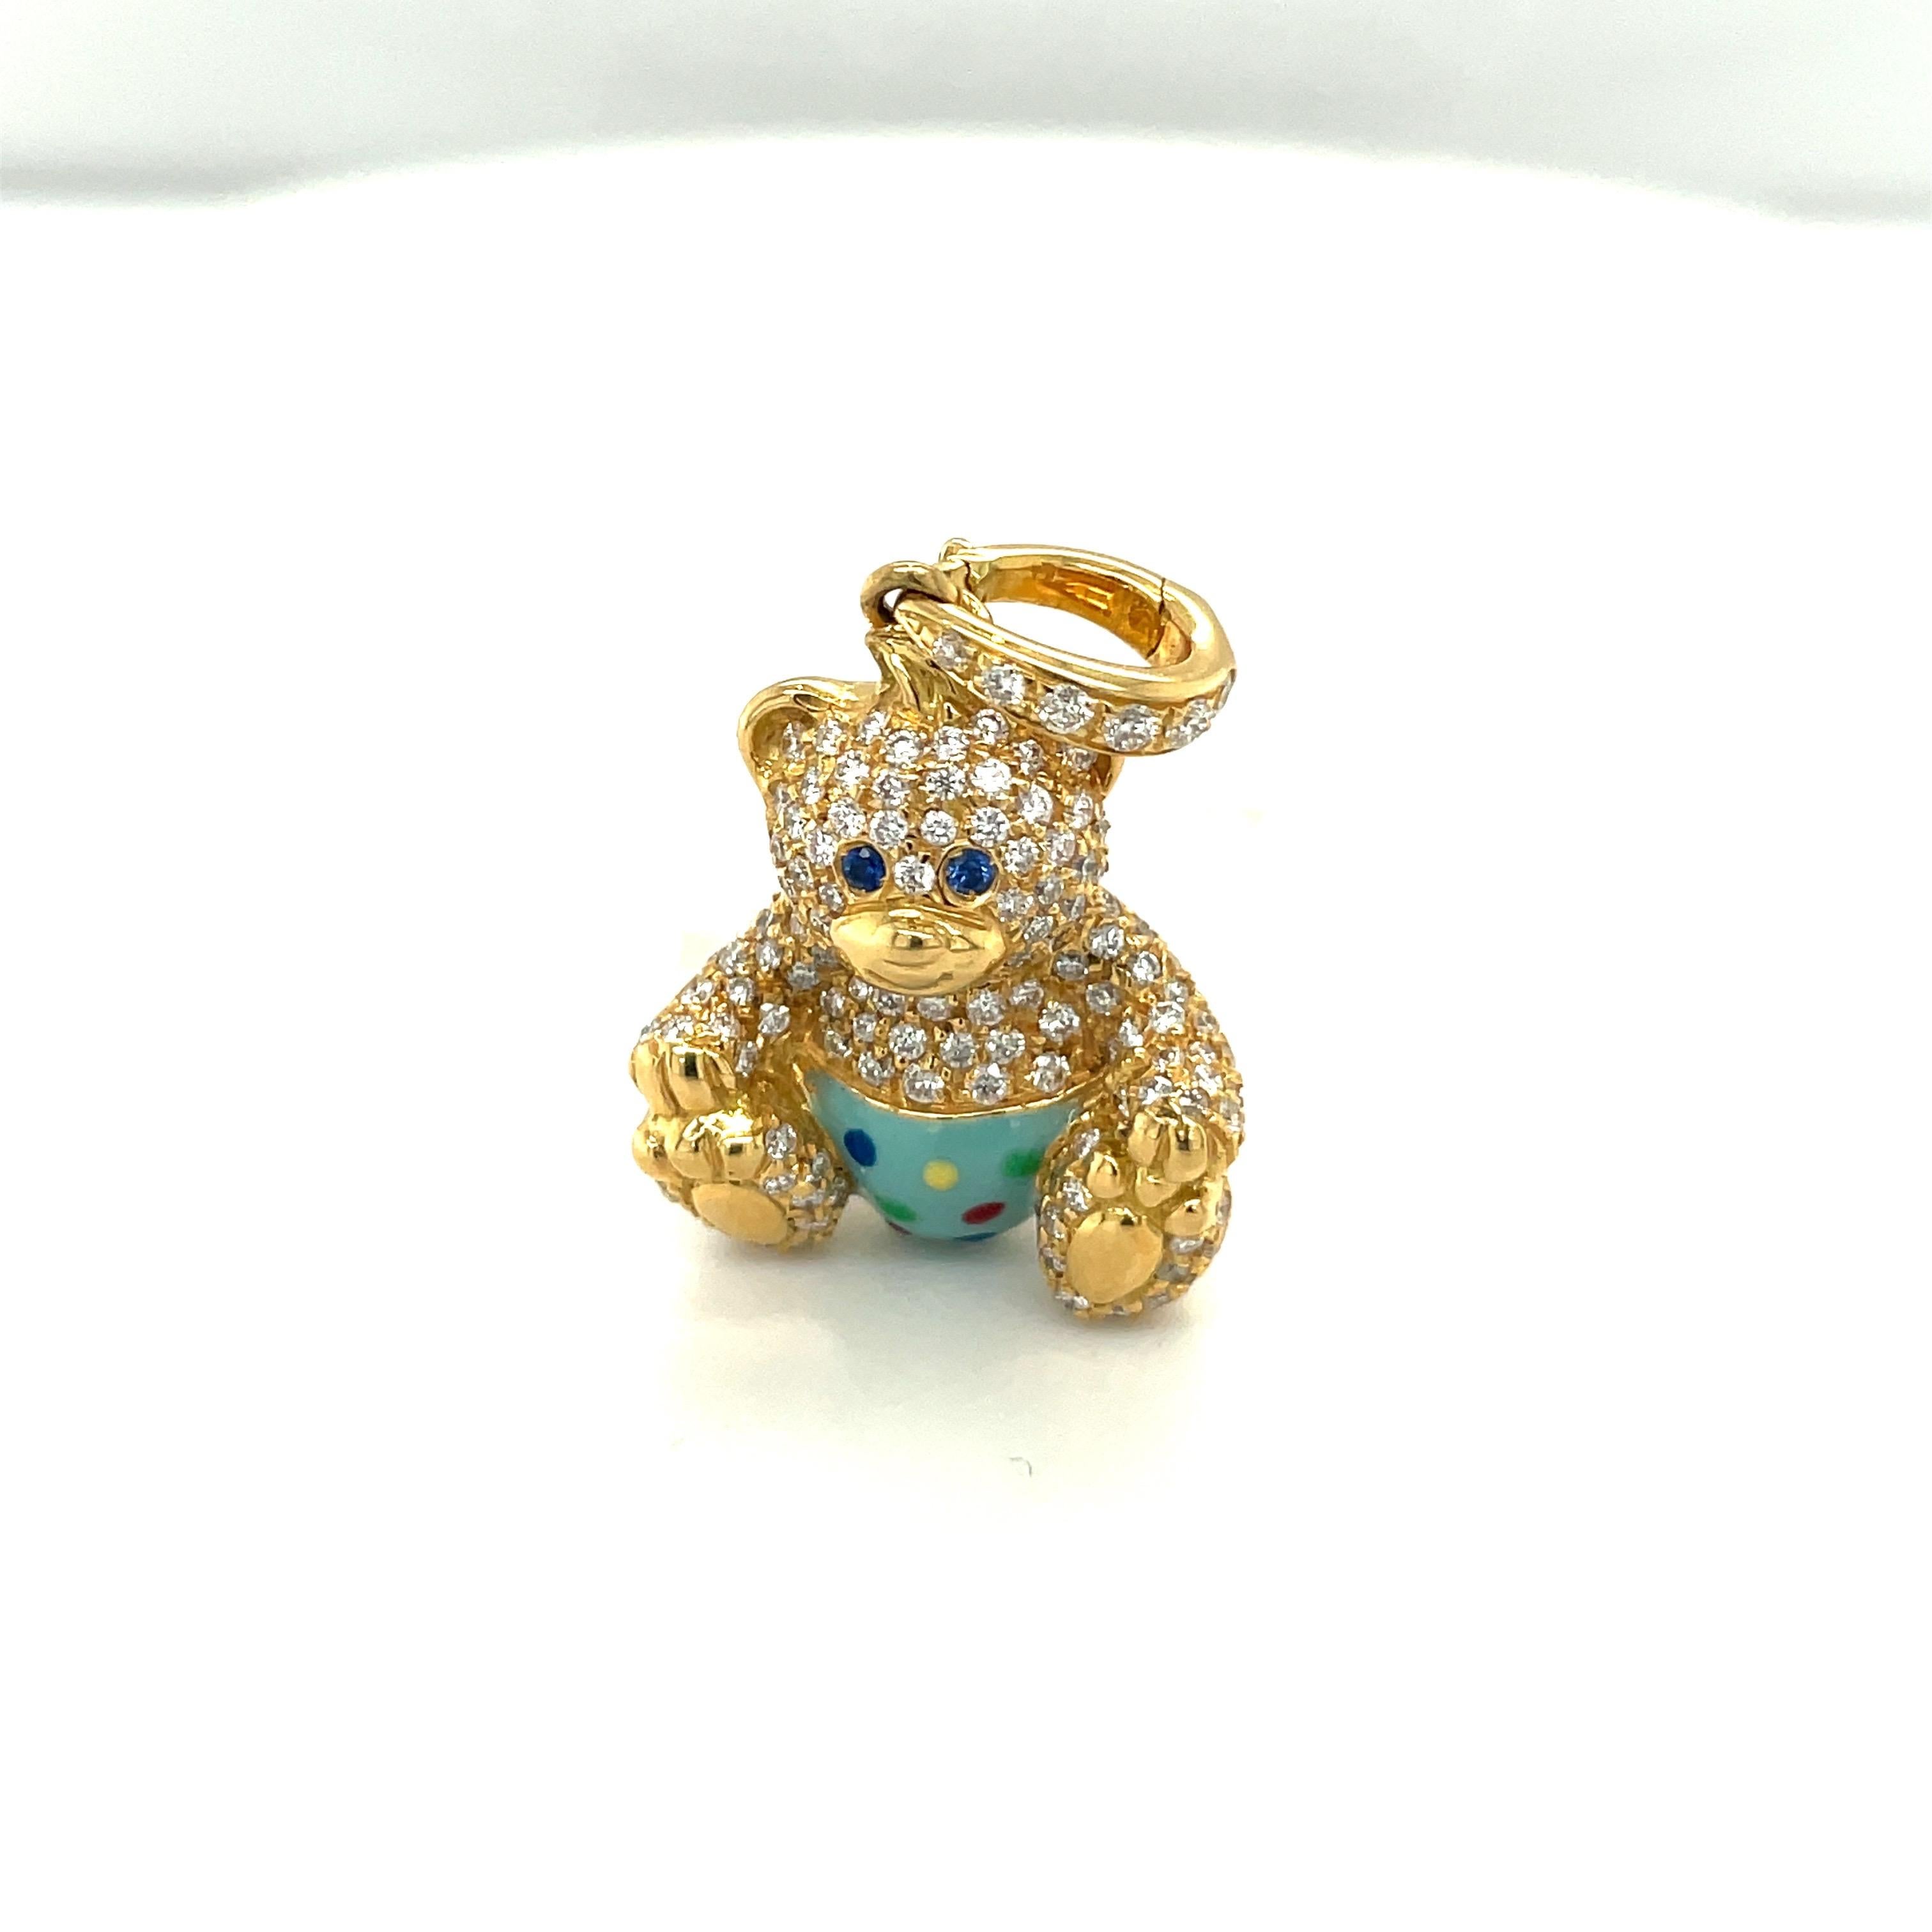 Just the cutest....Teddy bear charm made exclusively for Cellini by Ambrosi of Italy.

This 18 karat yellow gold teddy bear is fully set with round brilliant pave diamonds. He has blue sapphire eyes . He wears a light blue enamel diaper with multi